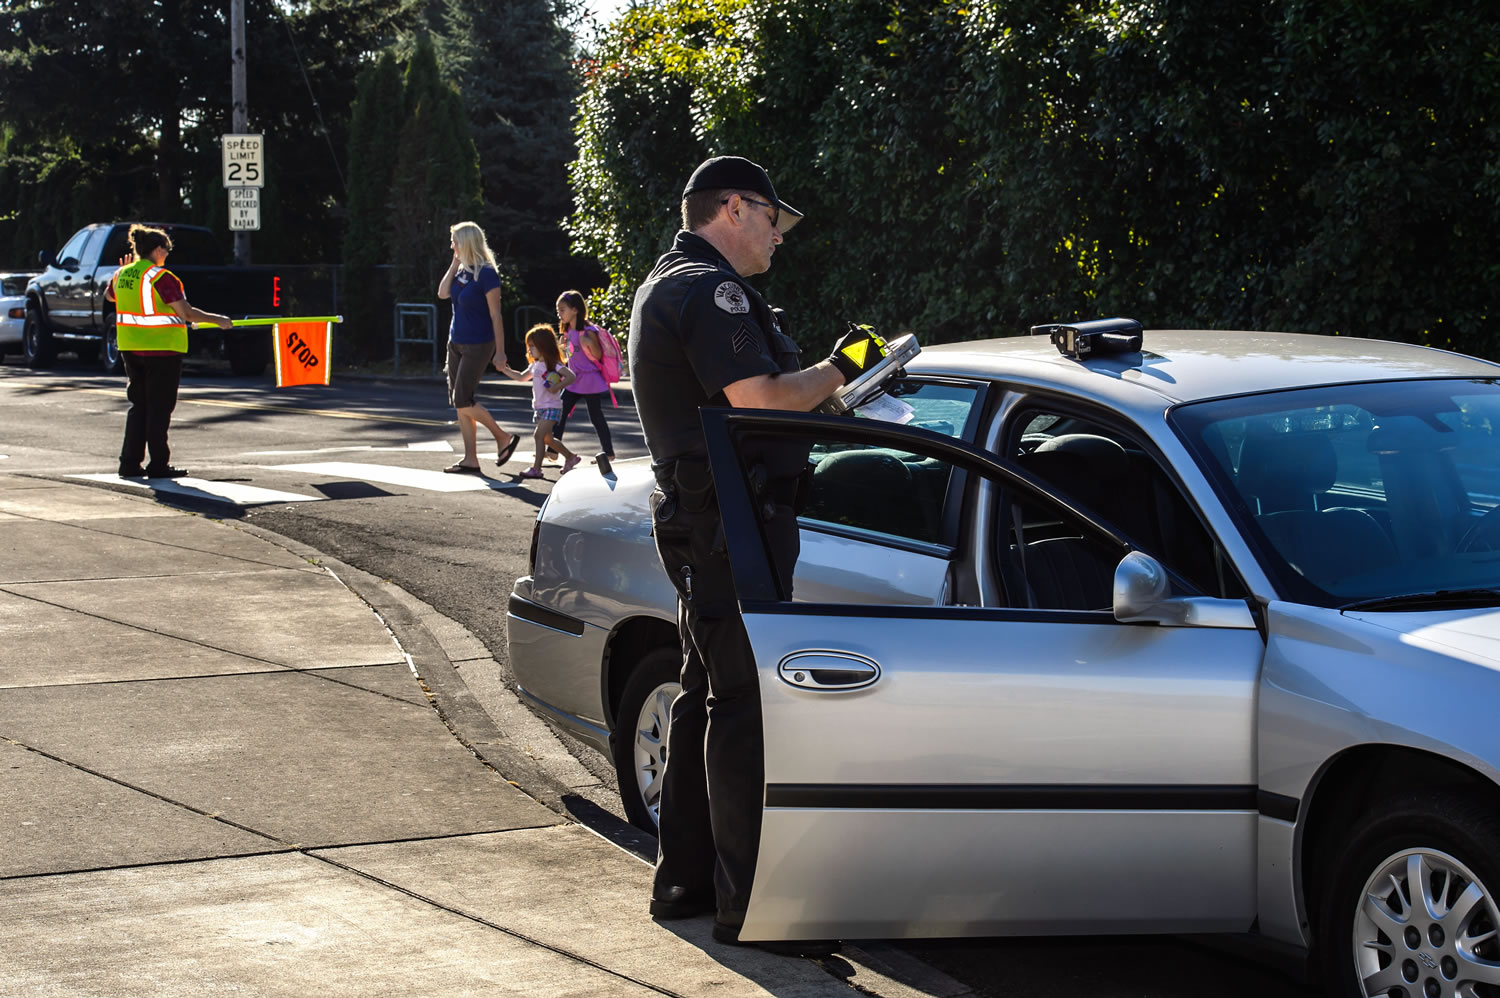 Vancouver police are planning to increase enforcement in and around schools on Wednesday, the first day of school for Vancouver and Evergreen school districts.